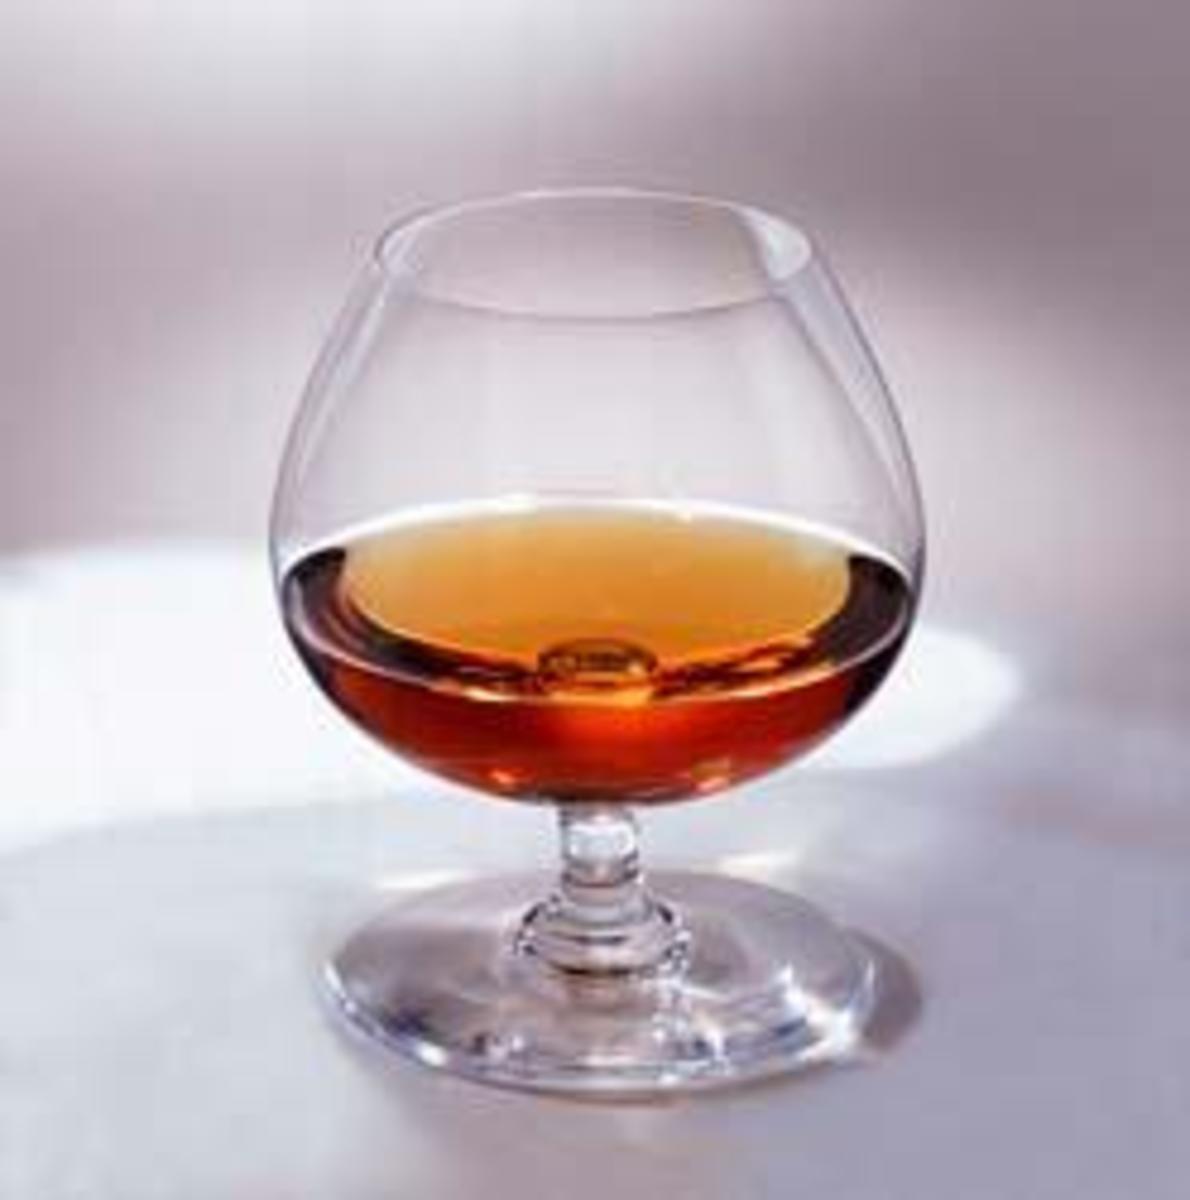 How to Drink Cognac, Brandy &amp; Eau De Vie - An Illustrated Guide / Tips ...